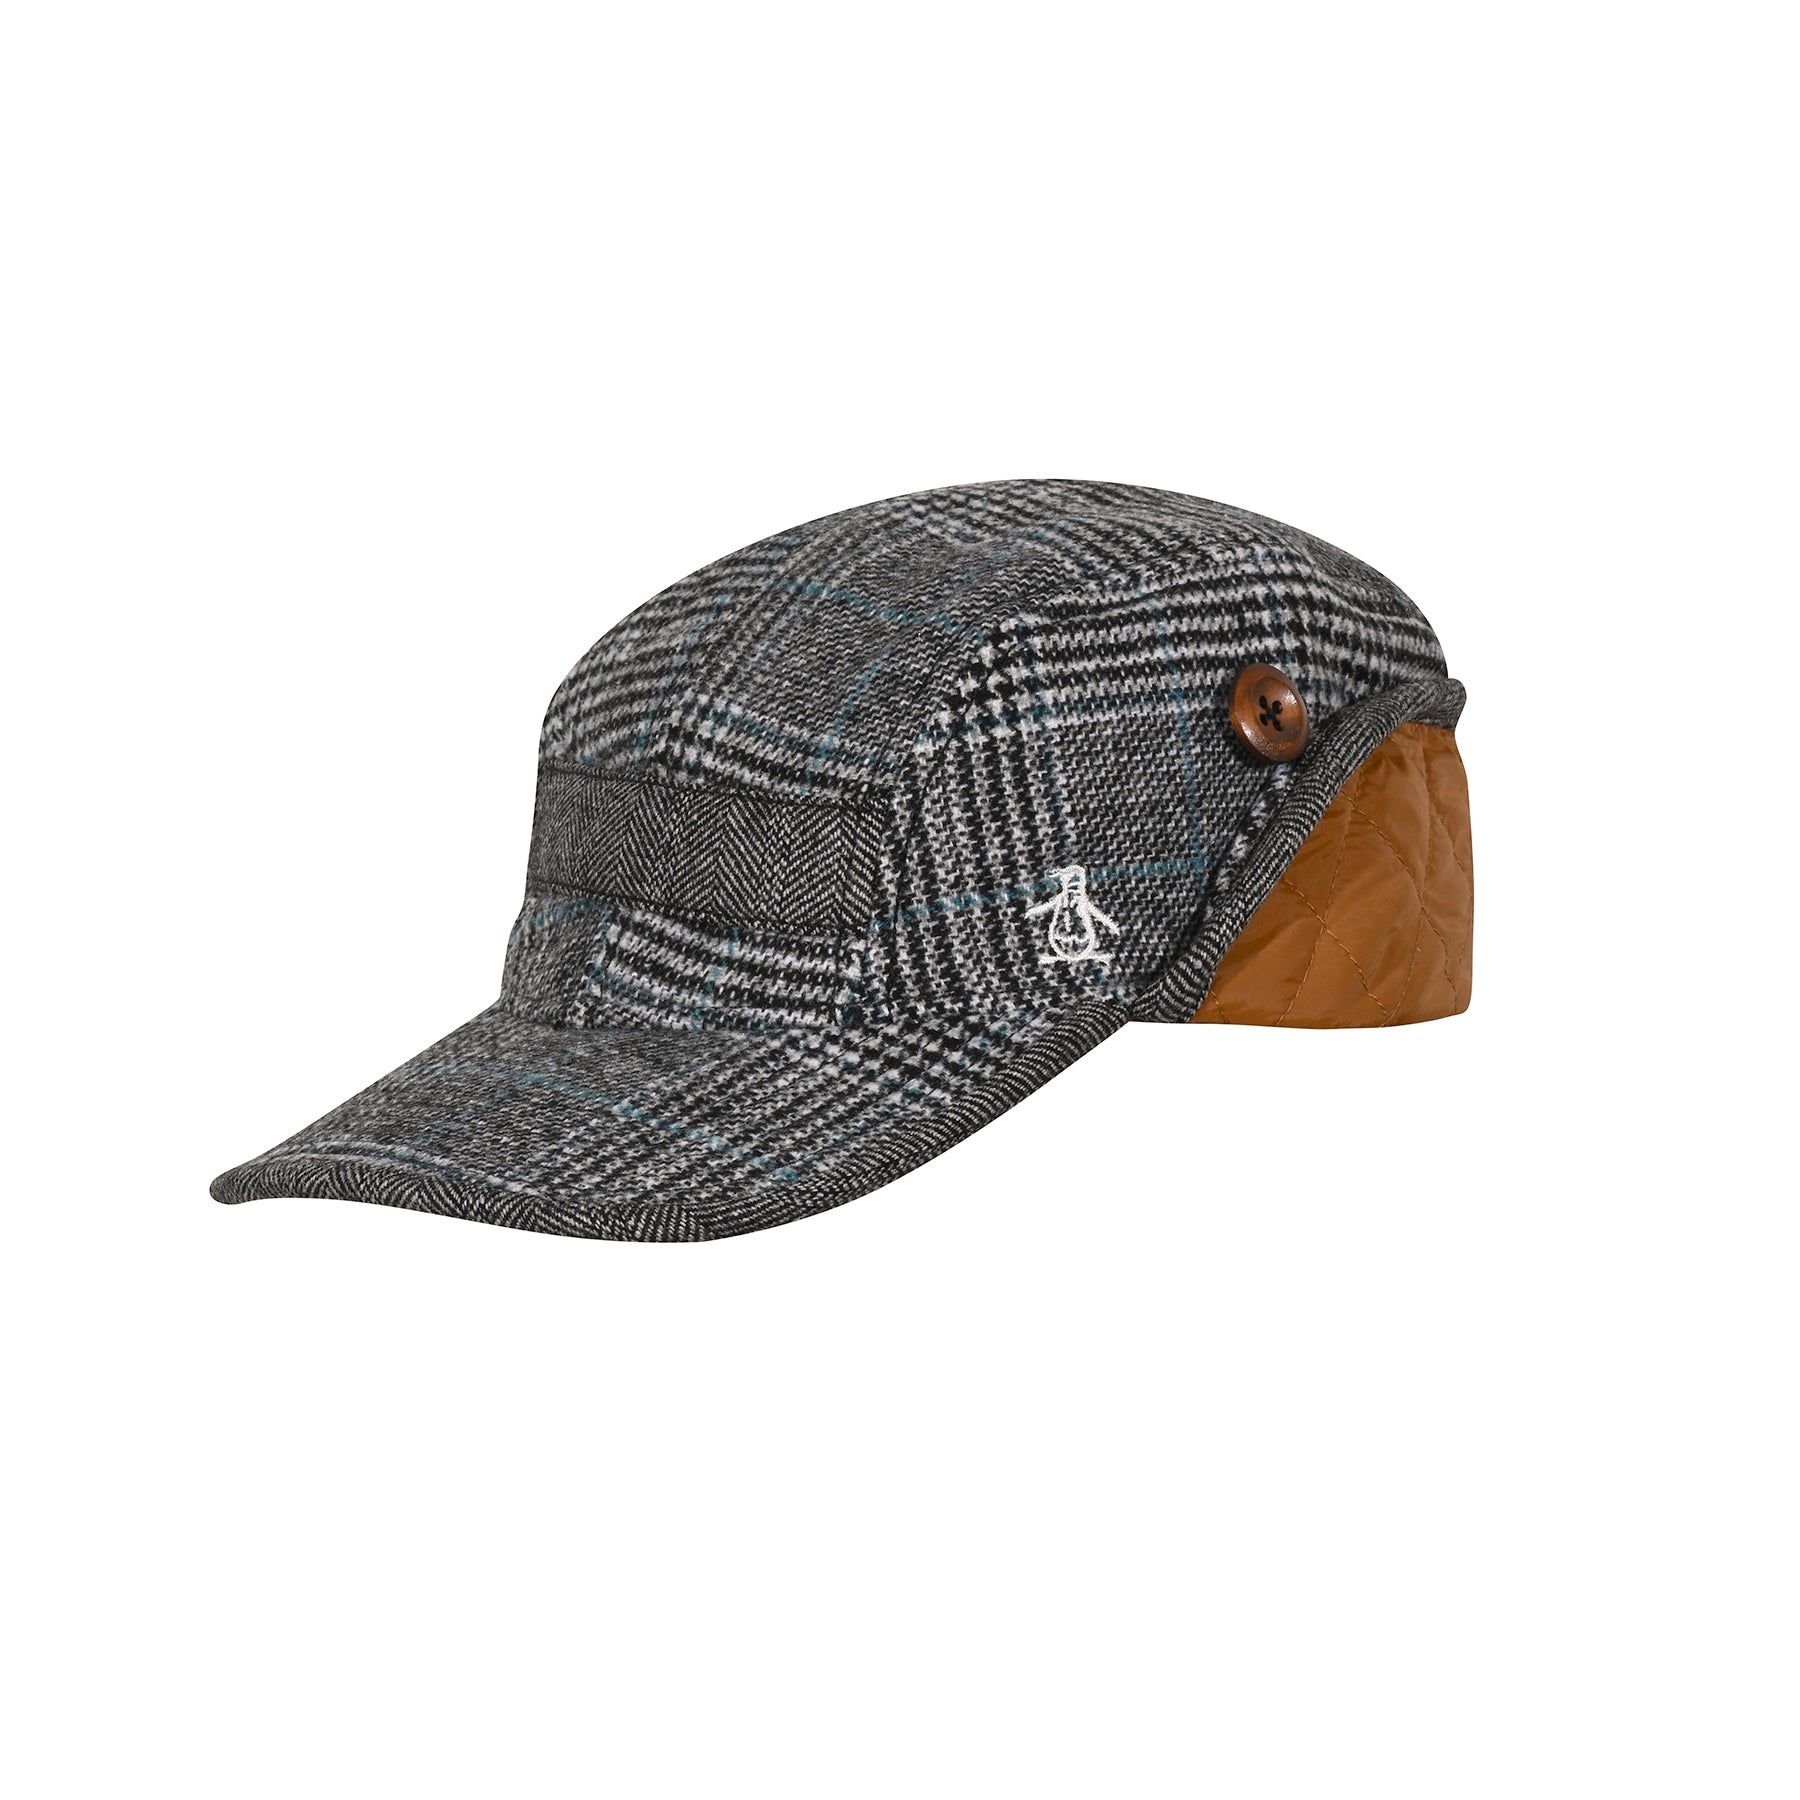 View Penguin Hat In Charcoal Marl information